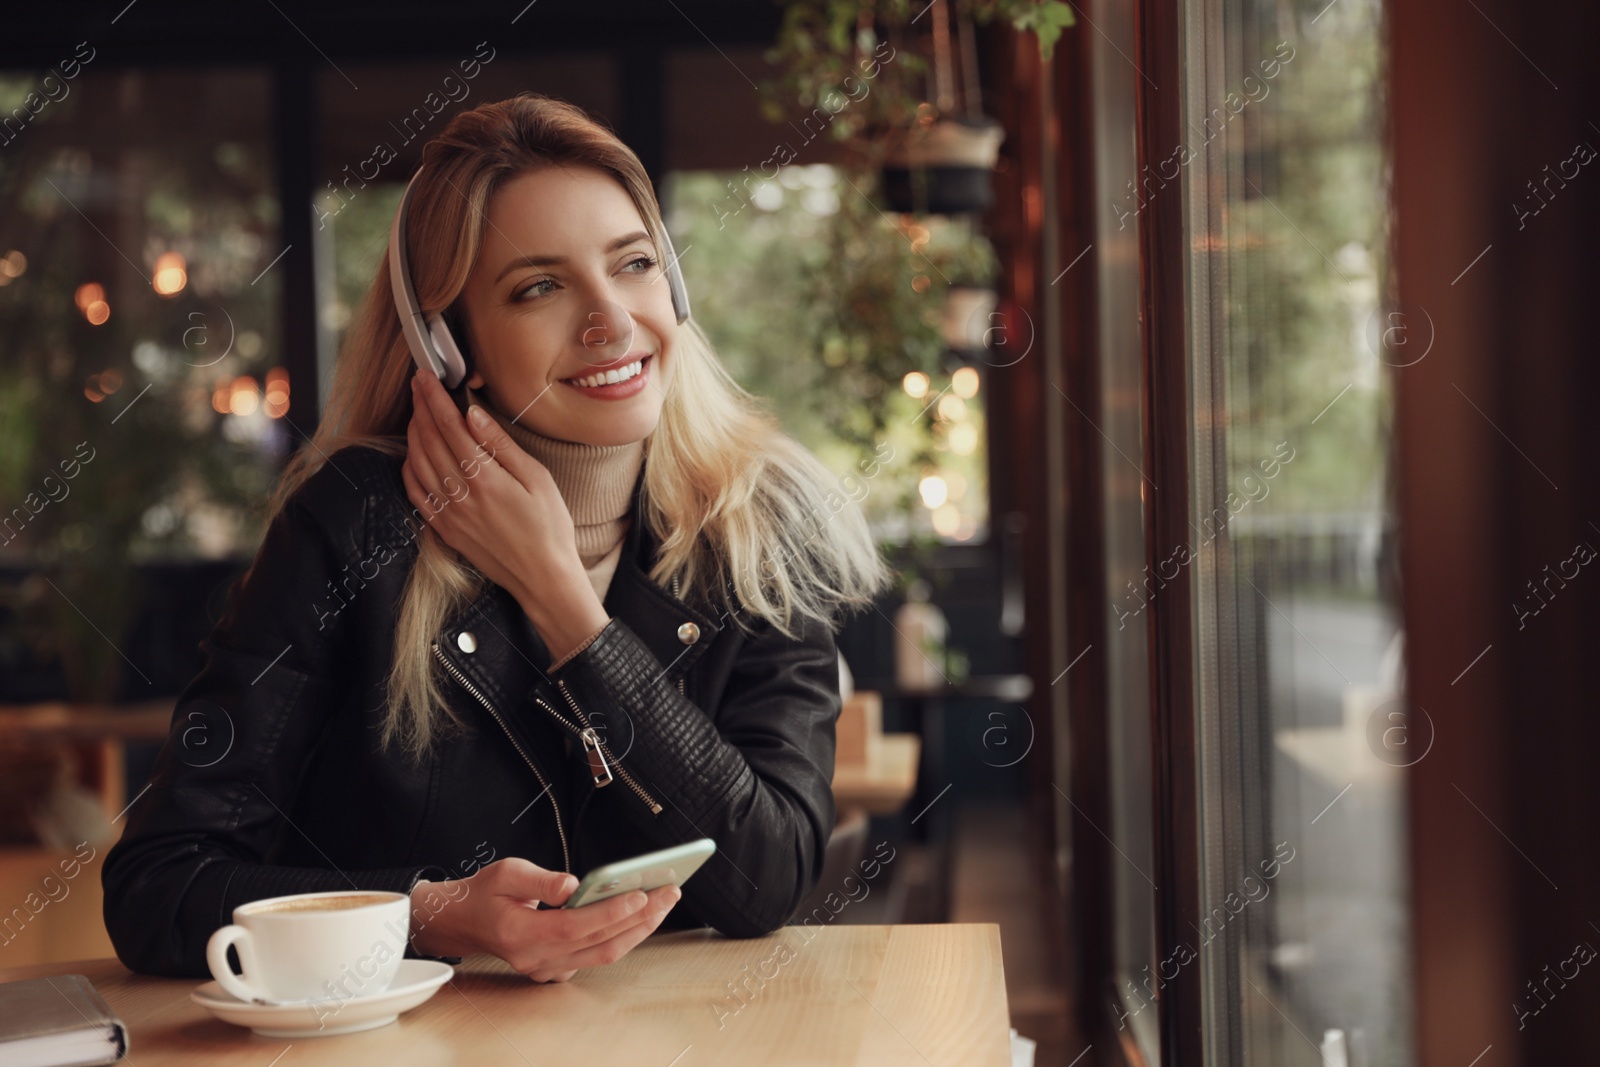 Photo of Young woman with headphones and smartphone listening to music in cafe